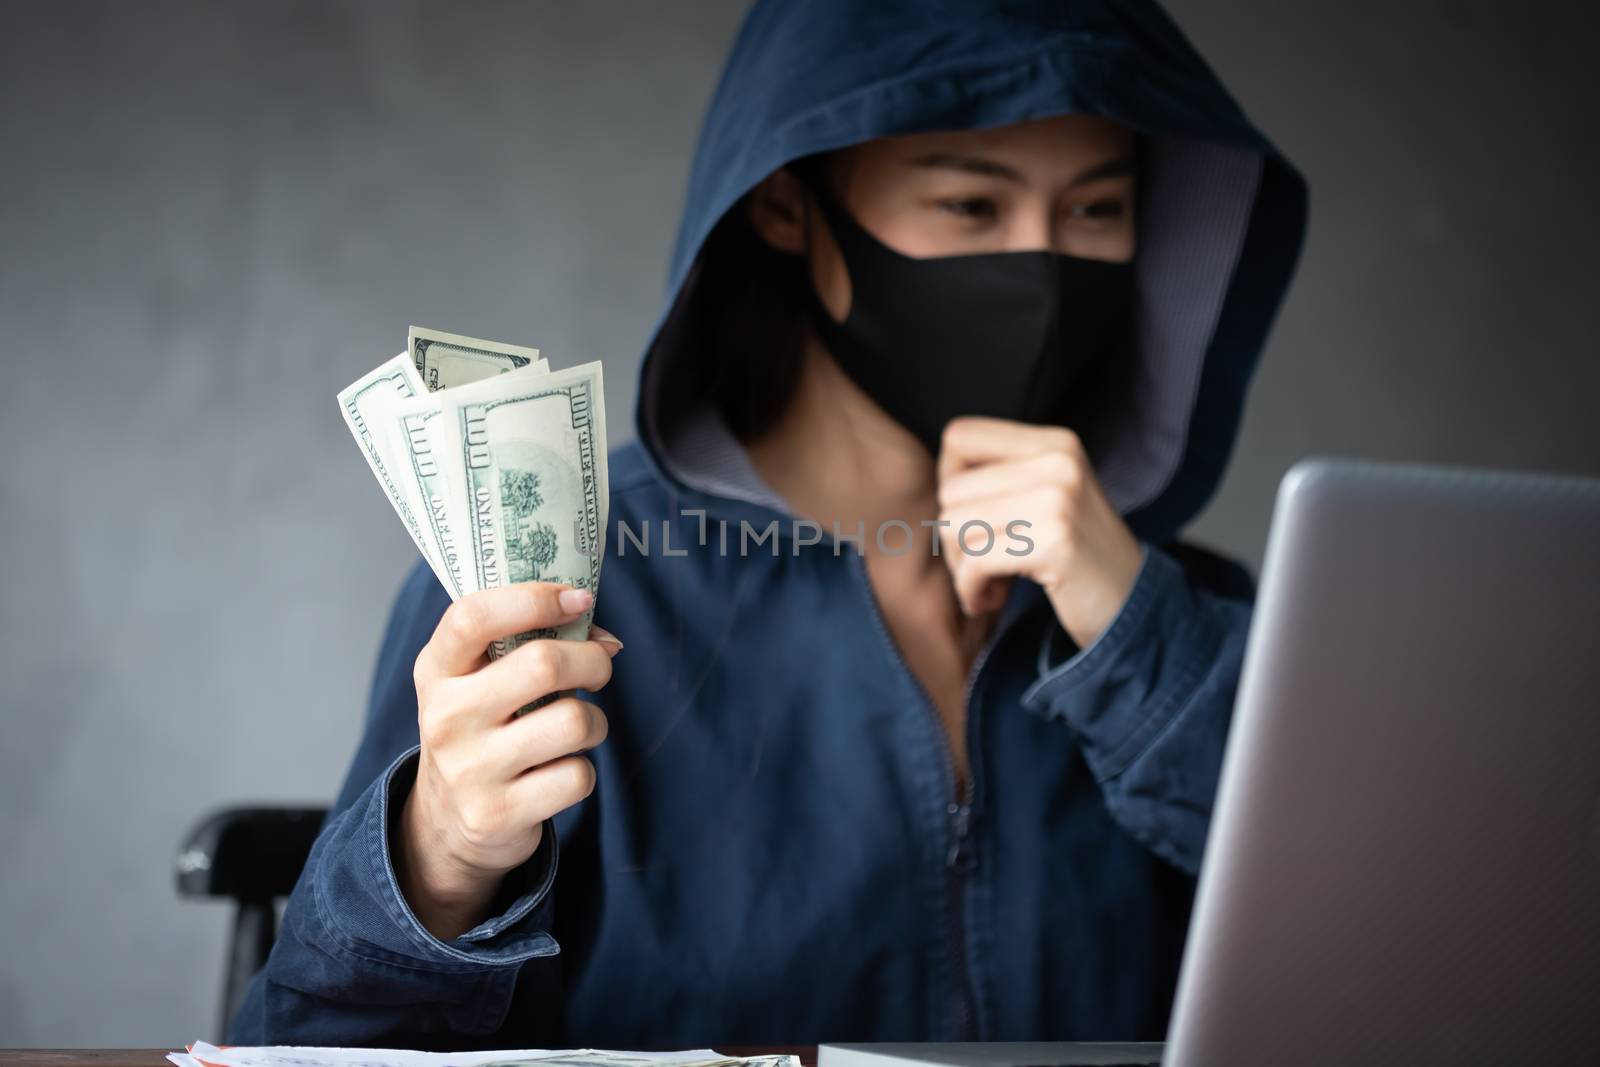 Professional hacker women Wearing a blue shirt with a hood Steal by photosam